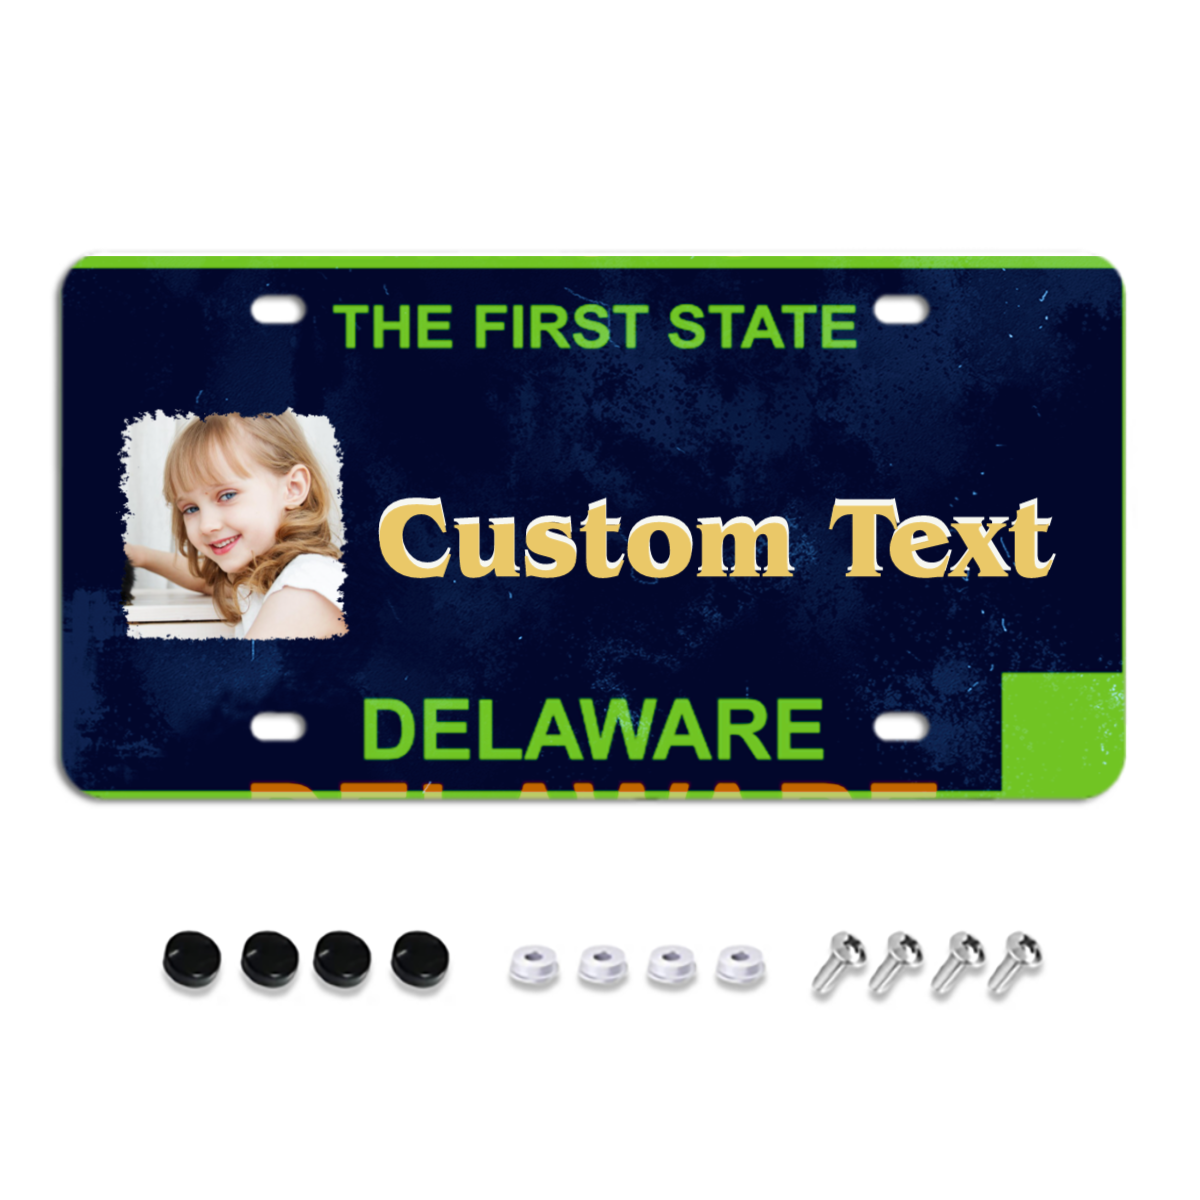 Delaware Custom License Plates, Personalized Photo & Text & Background